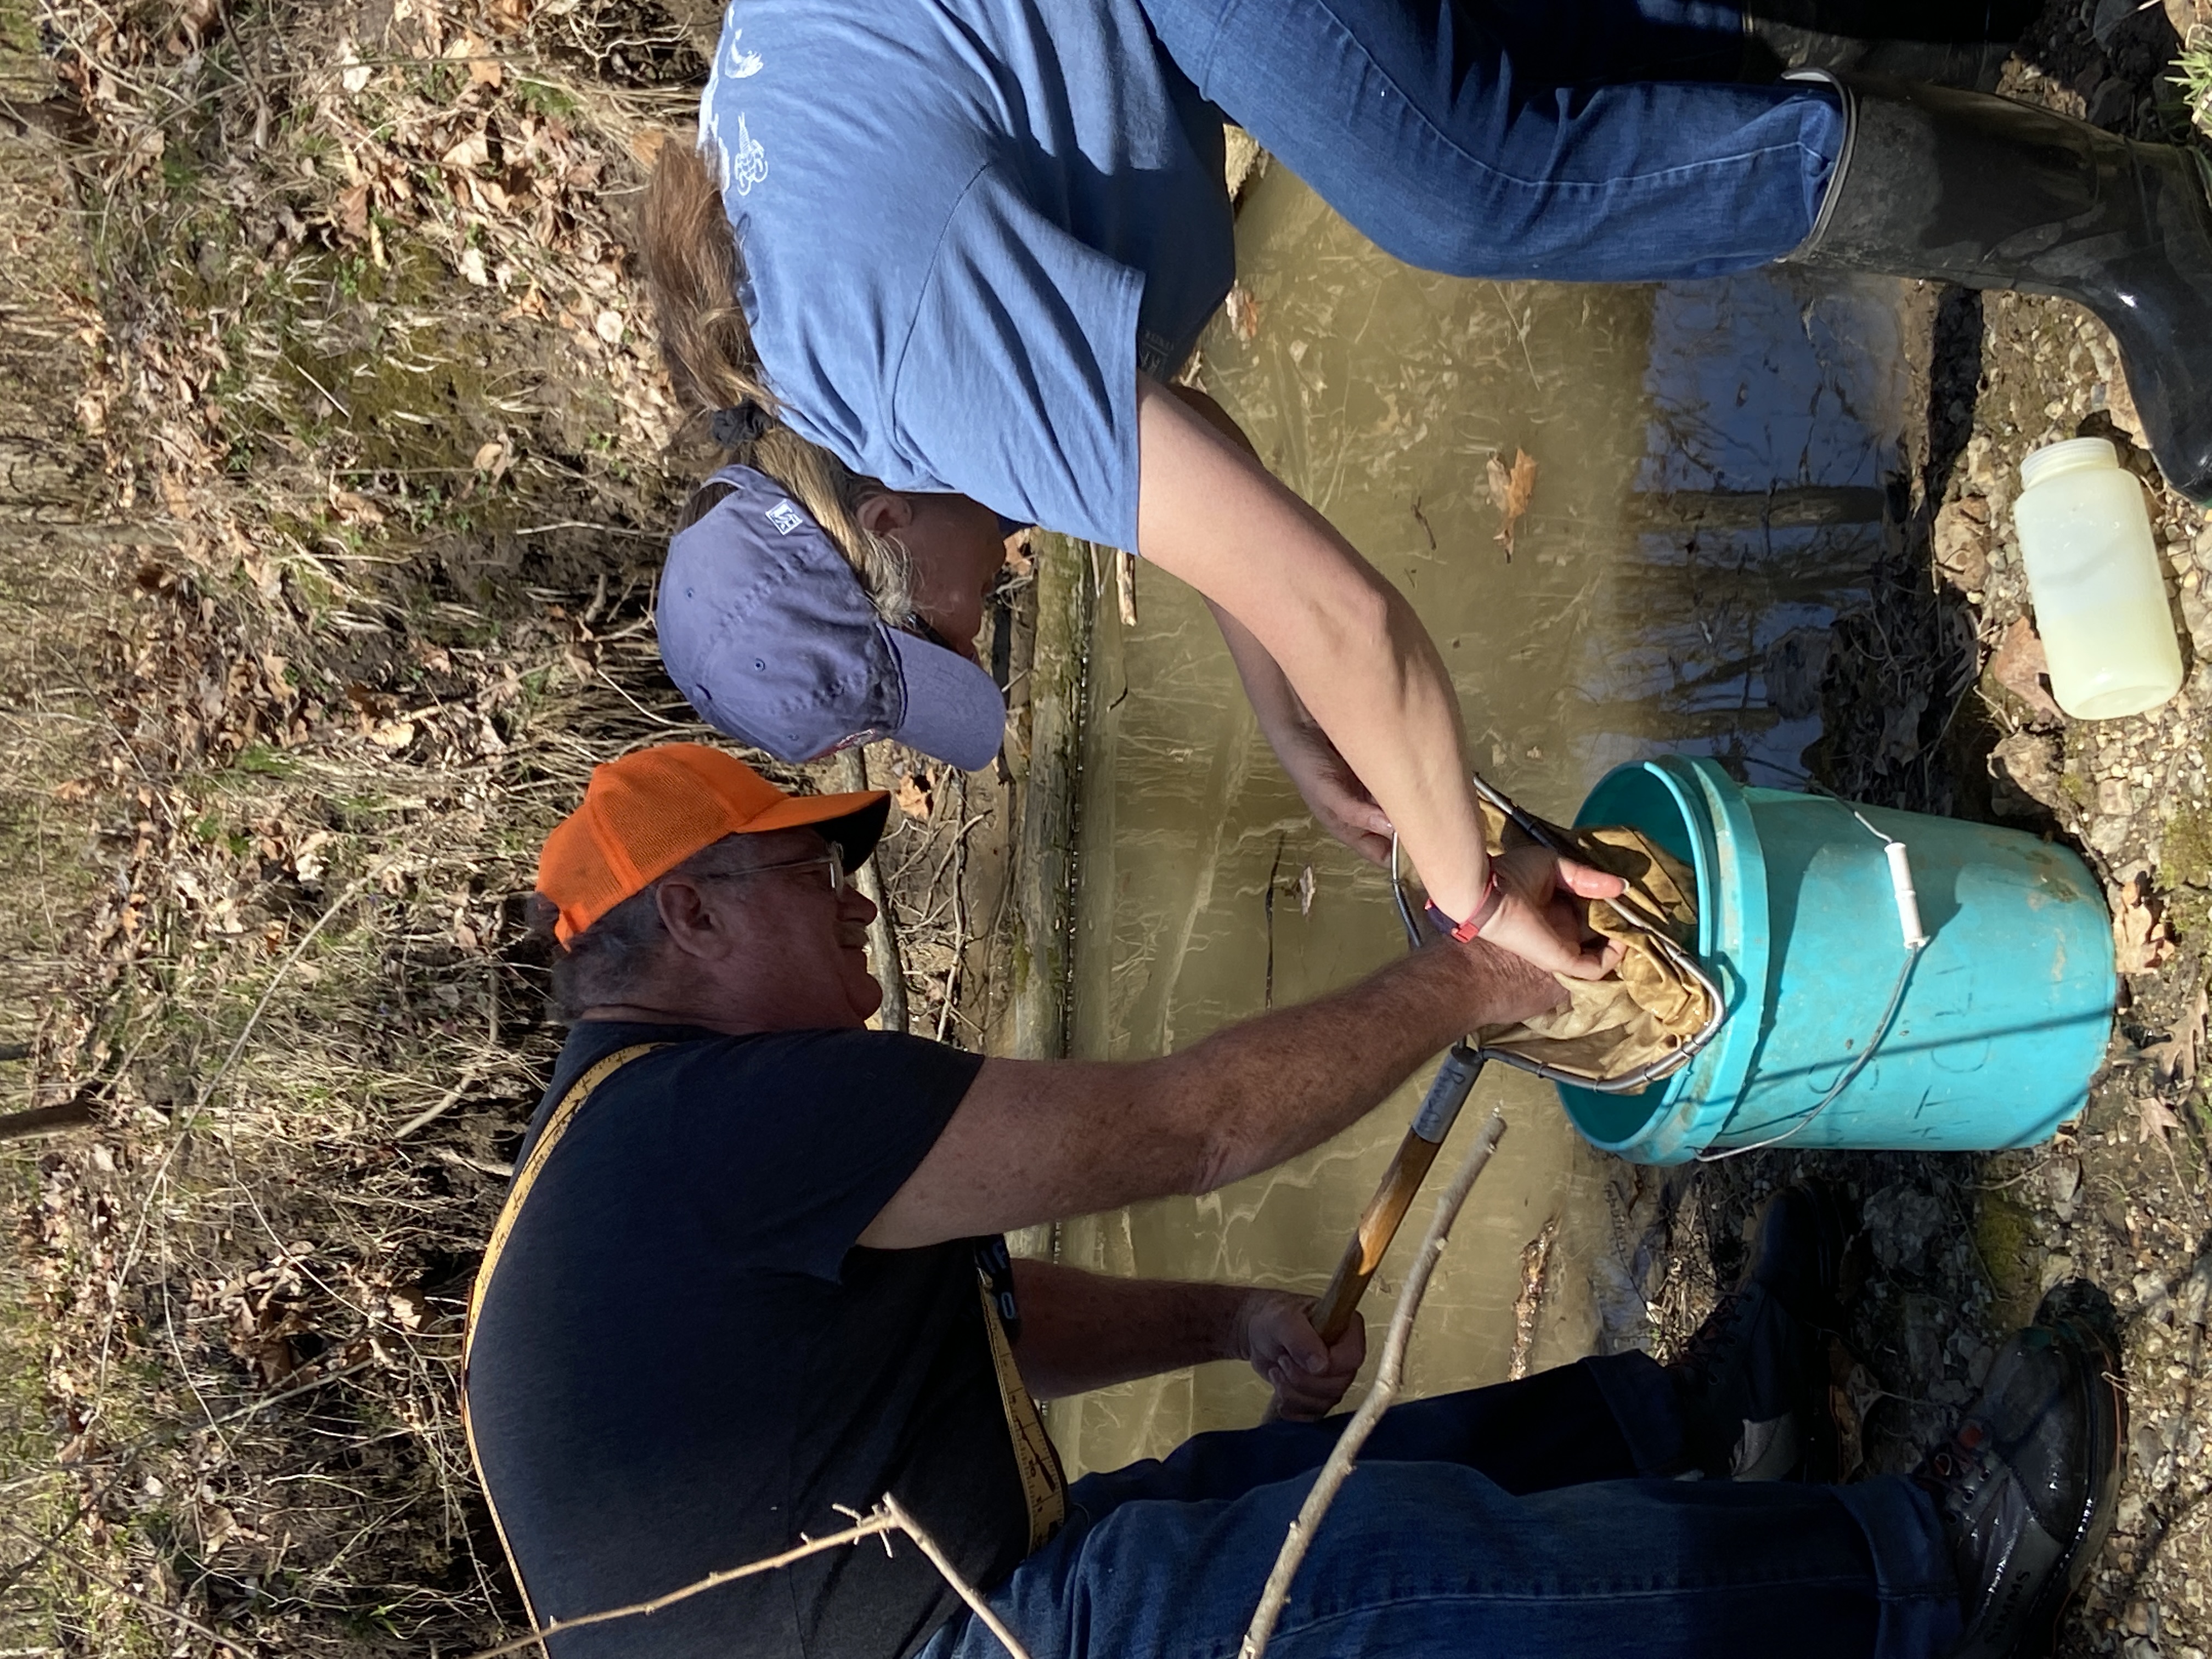 RiverWatch training workshops teach volunteers to monitor water quality in their local streams.